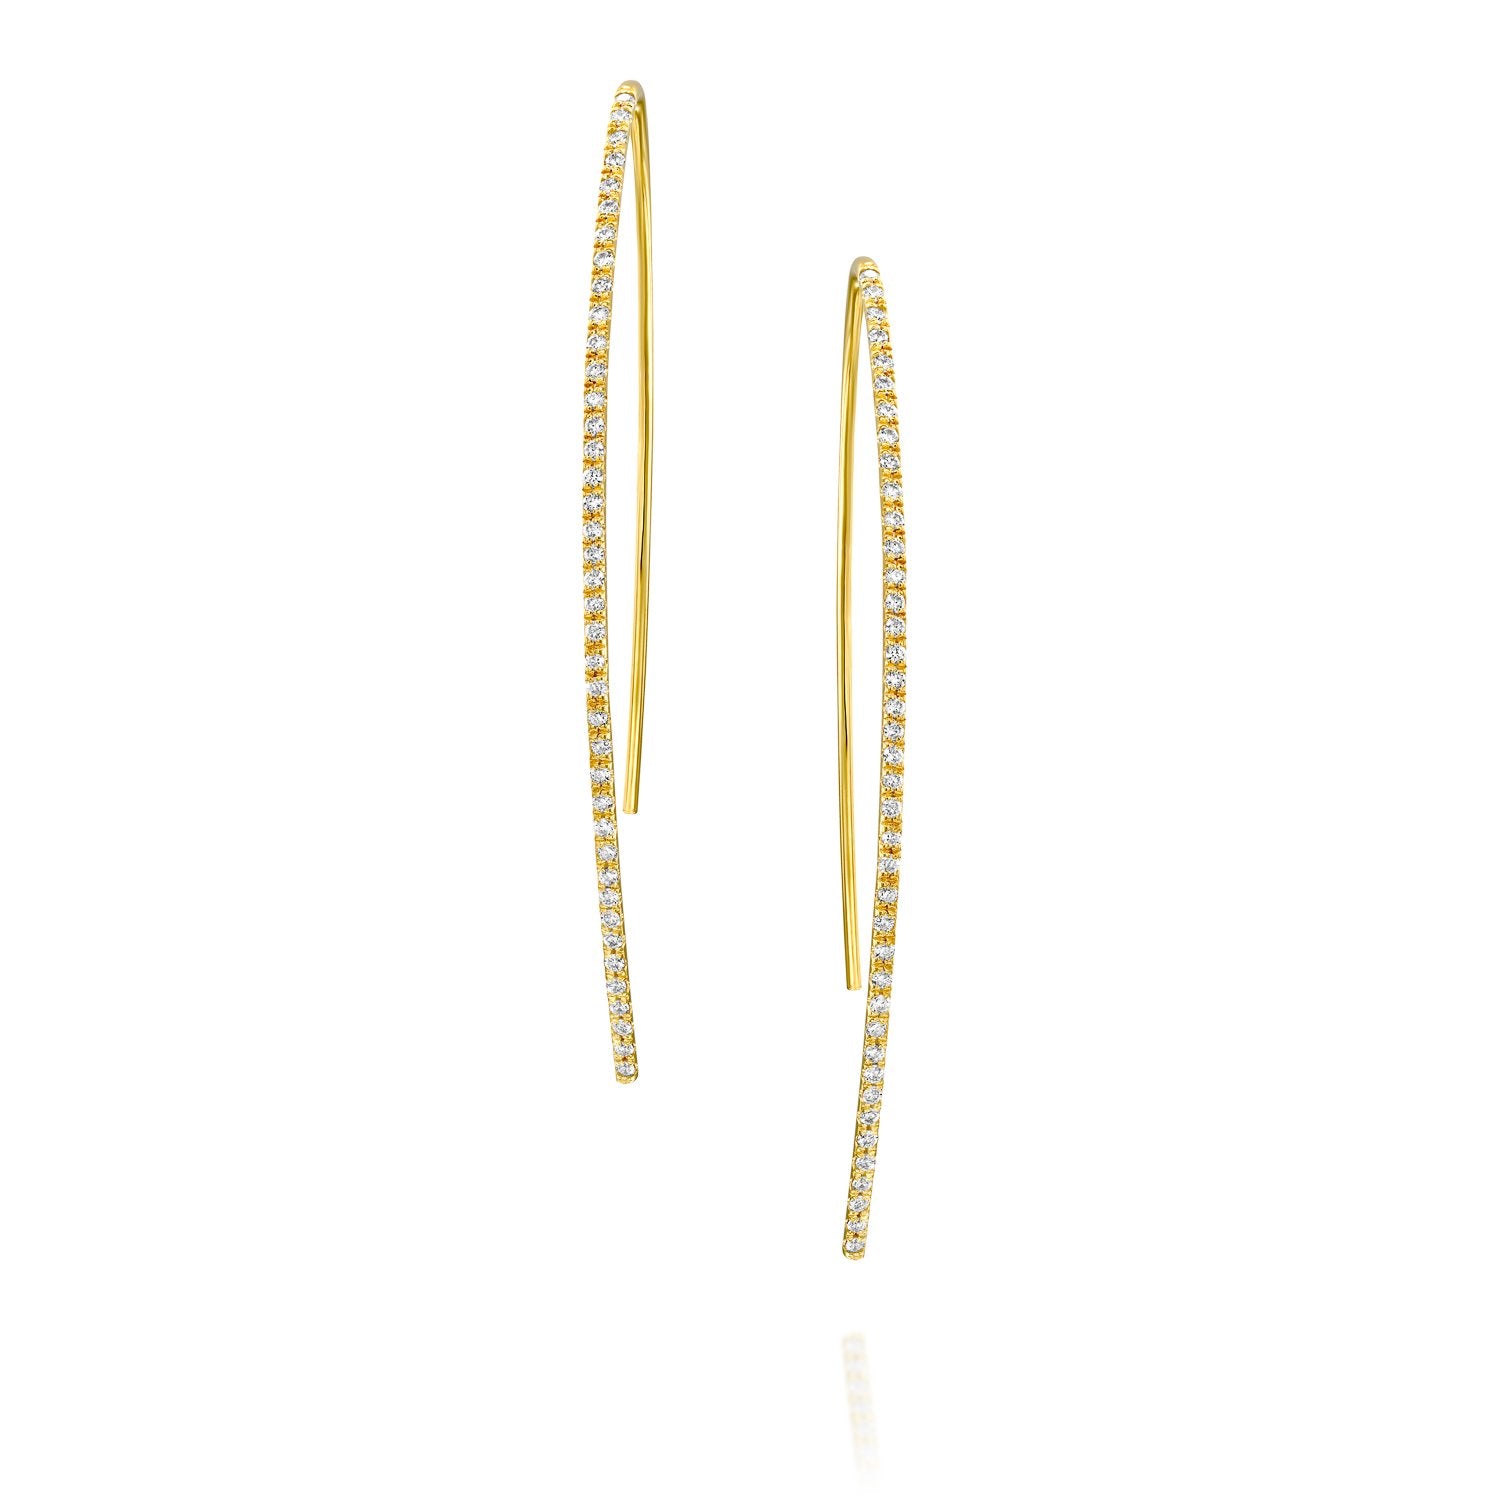 5130 - modern pave diamond bar earring in 14kt yellow gold